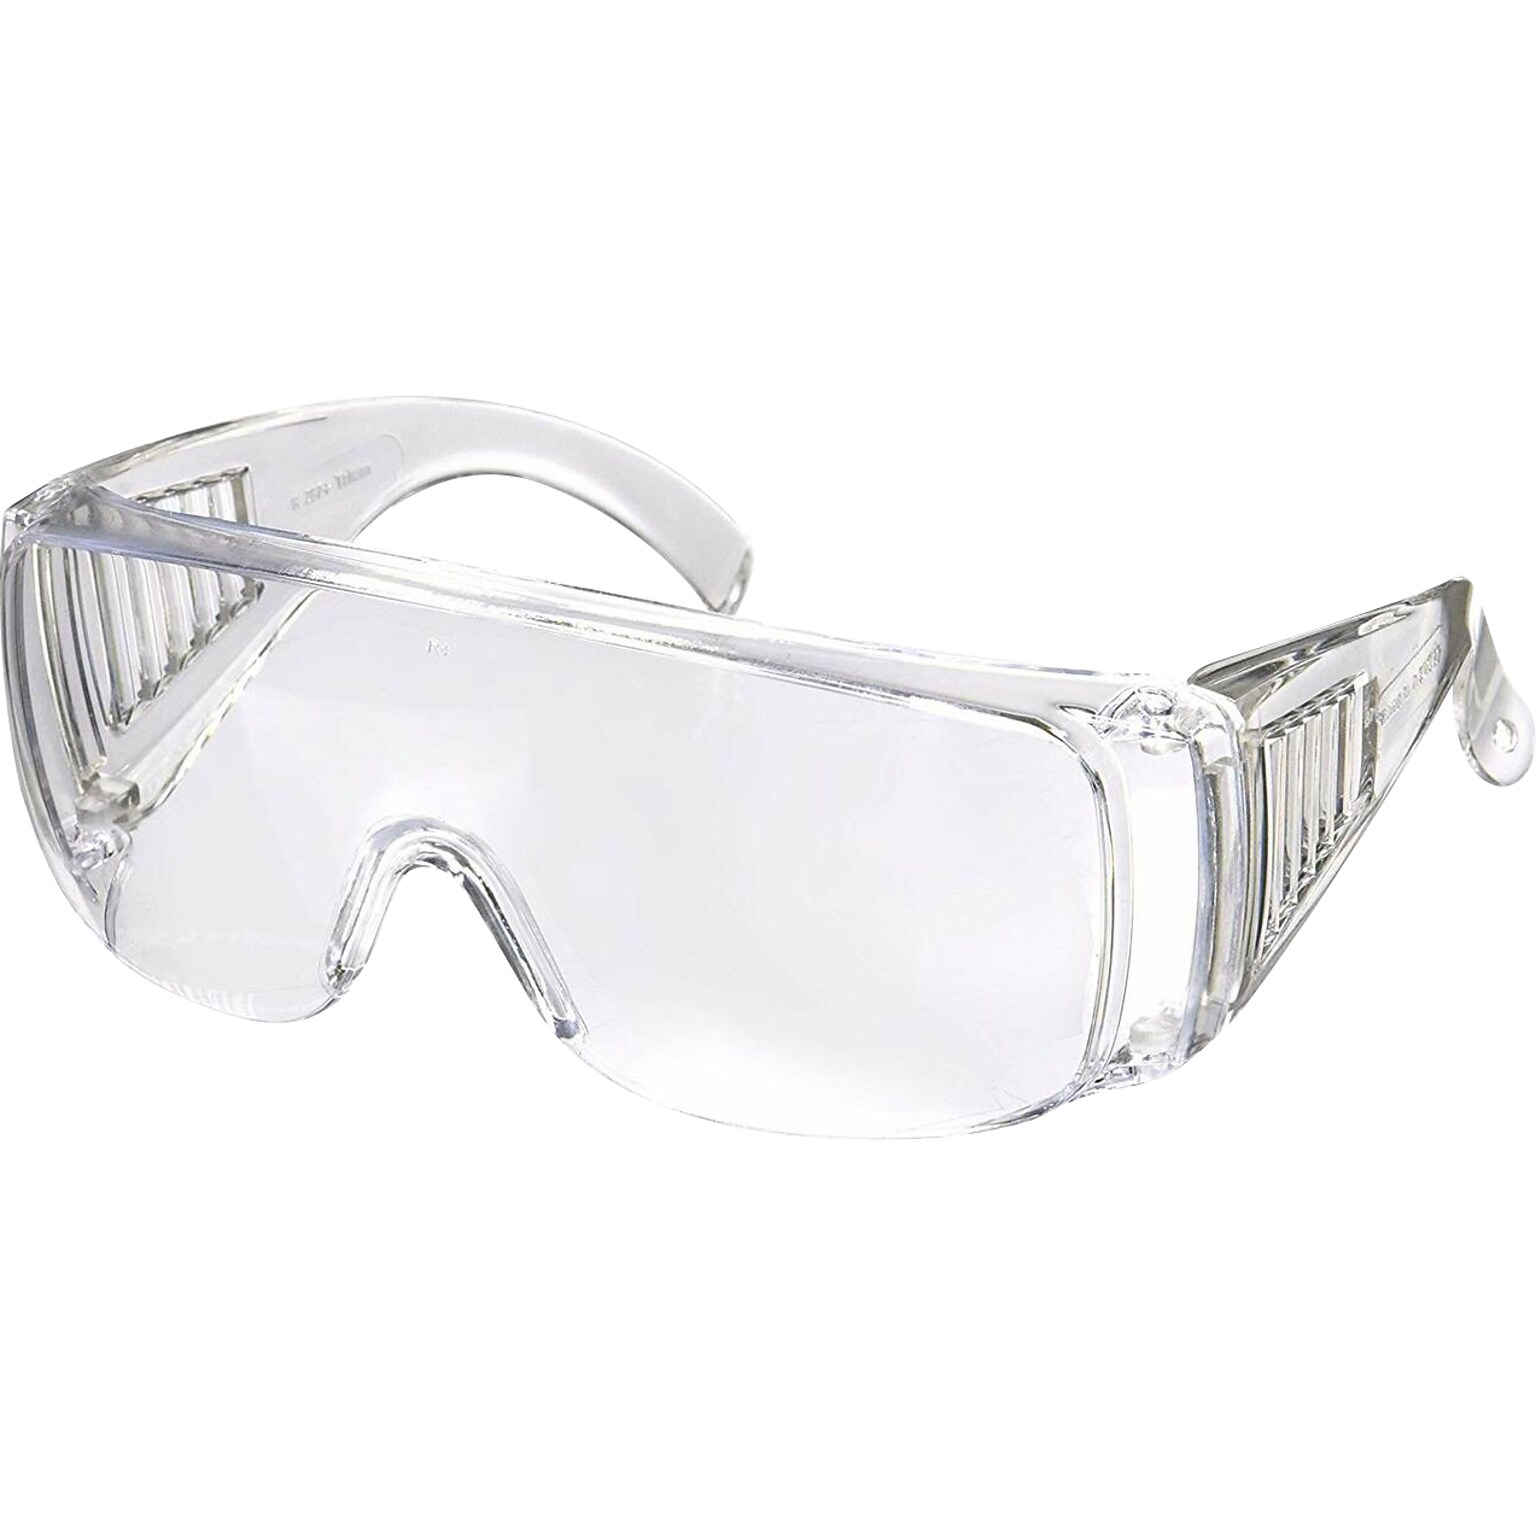 Lighthouse Safety Glasses, Clear Lens, 12/Box, 20 Boxes/Carton (PSGM872303)